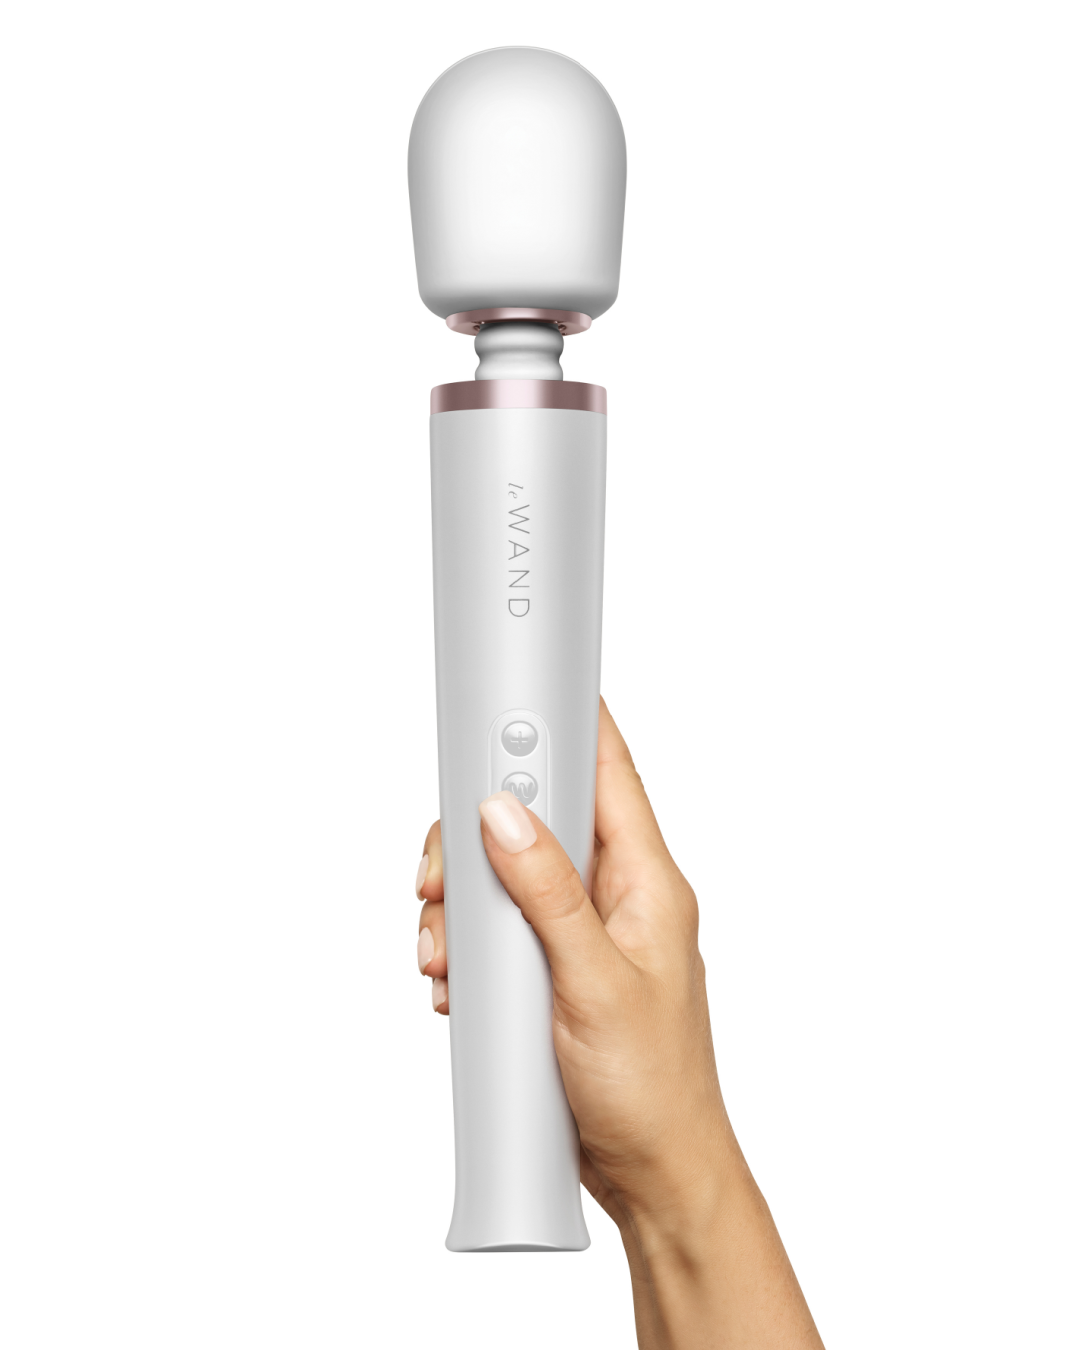 Le Wand Cordless Vibrating Massager - White held in a person's hand to show the size